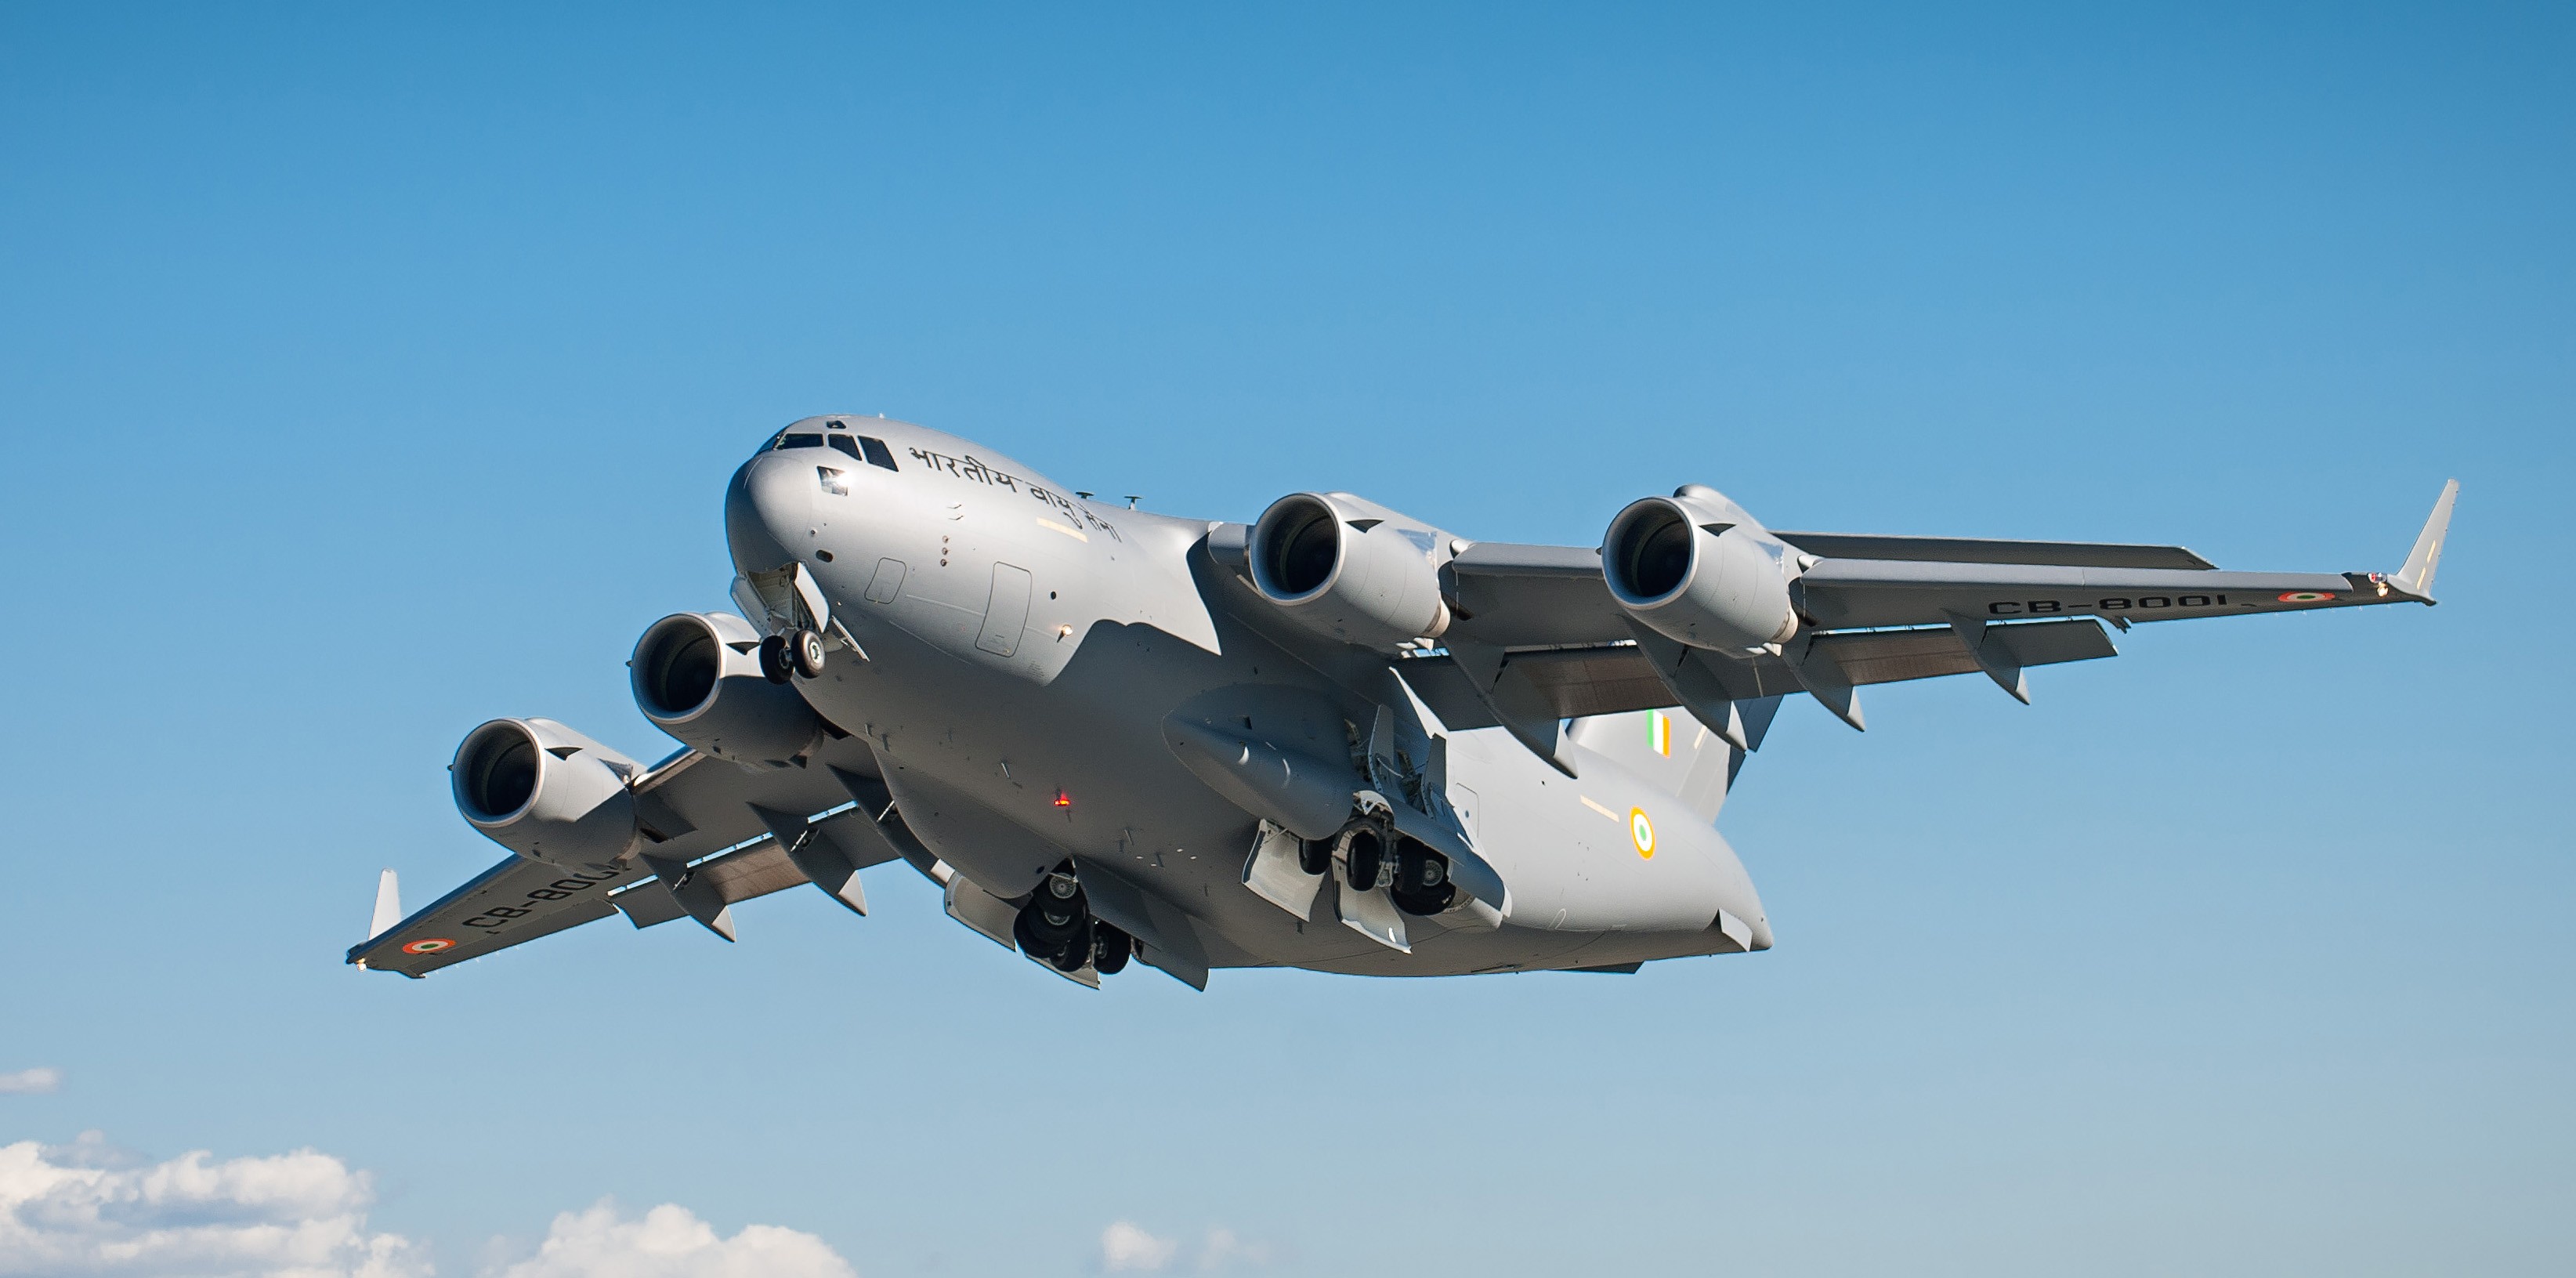 General 3288x1631 Boeing C-17 Globemaster III Indian Air Force military military aircraft airplane cargo vehicle military vehicle aircraft Boeing American aircraft